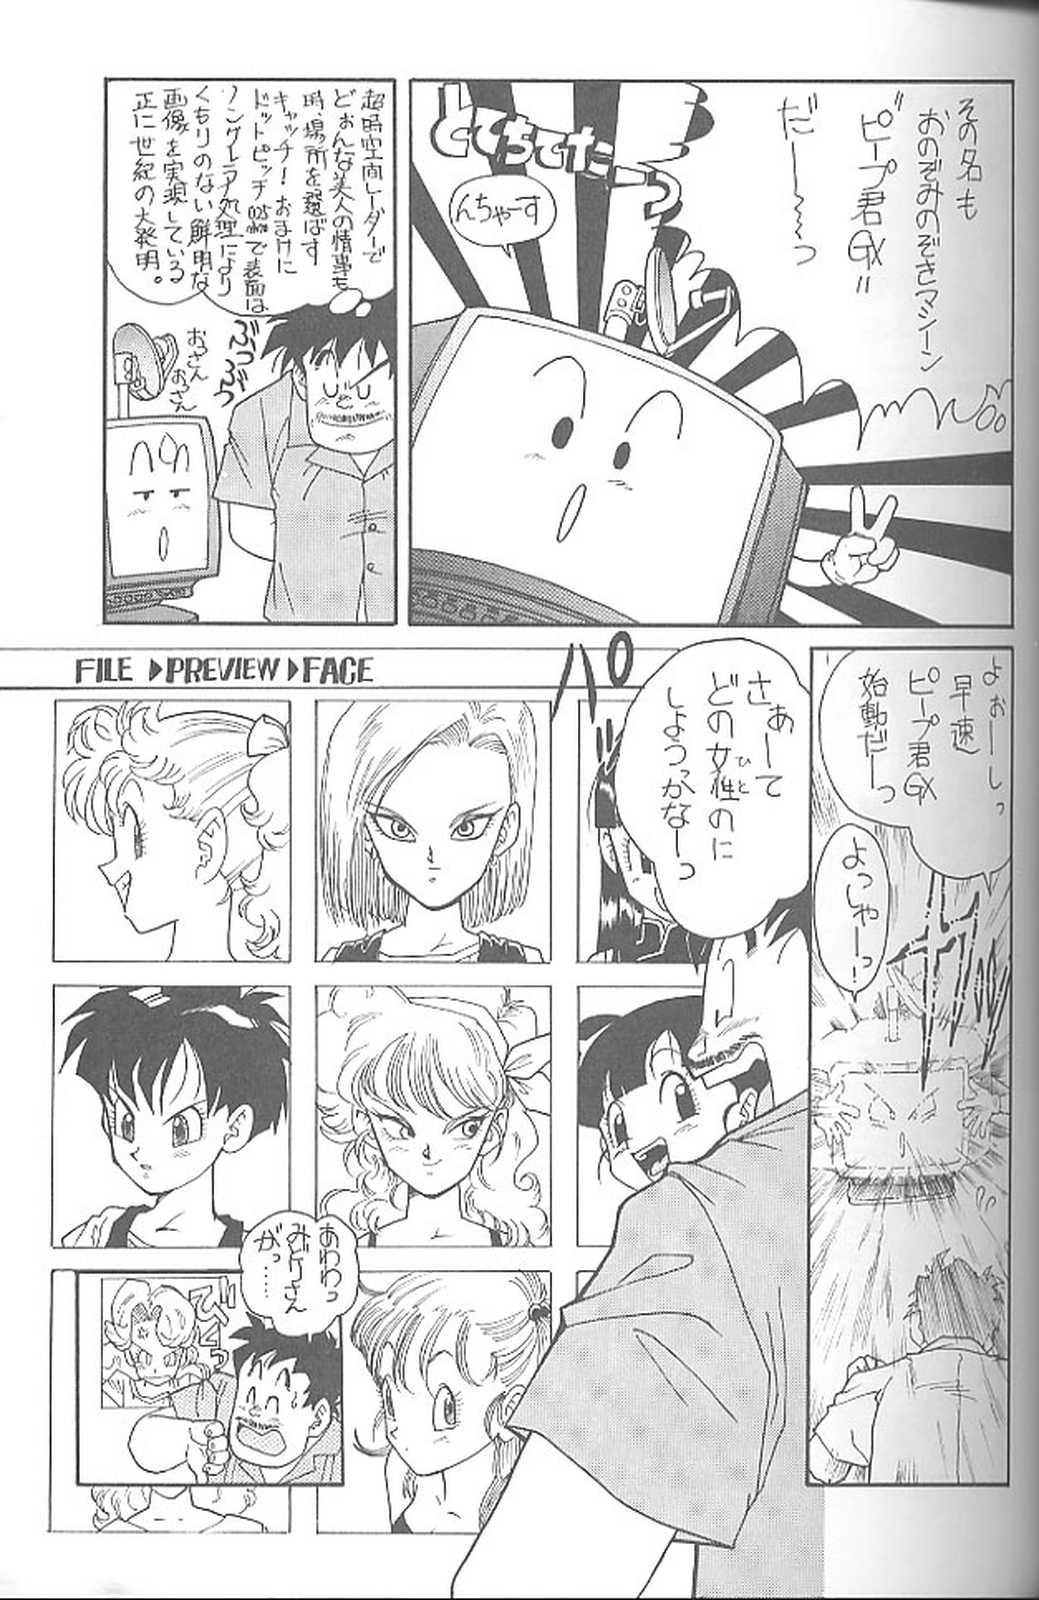 Harcore Haraharatokei vol.4 - Dragon ball z Slayers Dirty pair Ghost sweeper mikami World masterpiece theater Dr. slump Tico of the seven seas Pale - Page 6